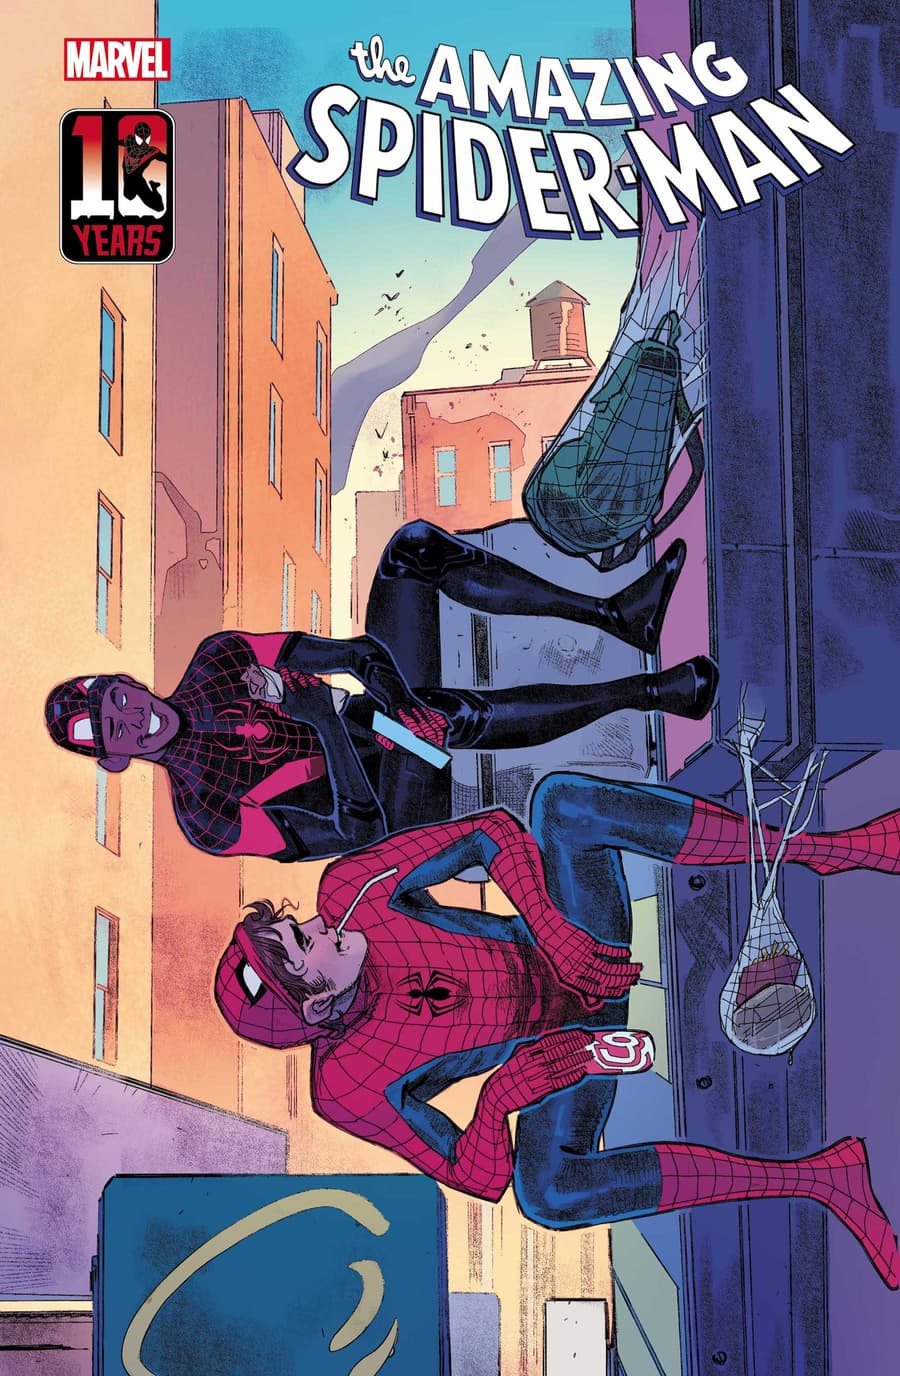 AMAZING SPIDER-MAN #74 MILES MORALES 10th ANNIVERSARY VARIANT COVER by SARA PICHELLI with colors by TAMRA BONVILLAIN